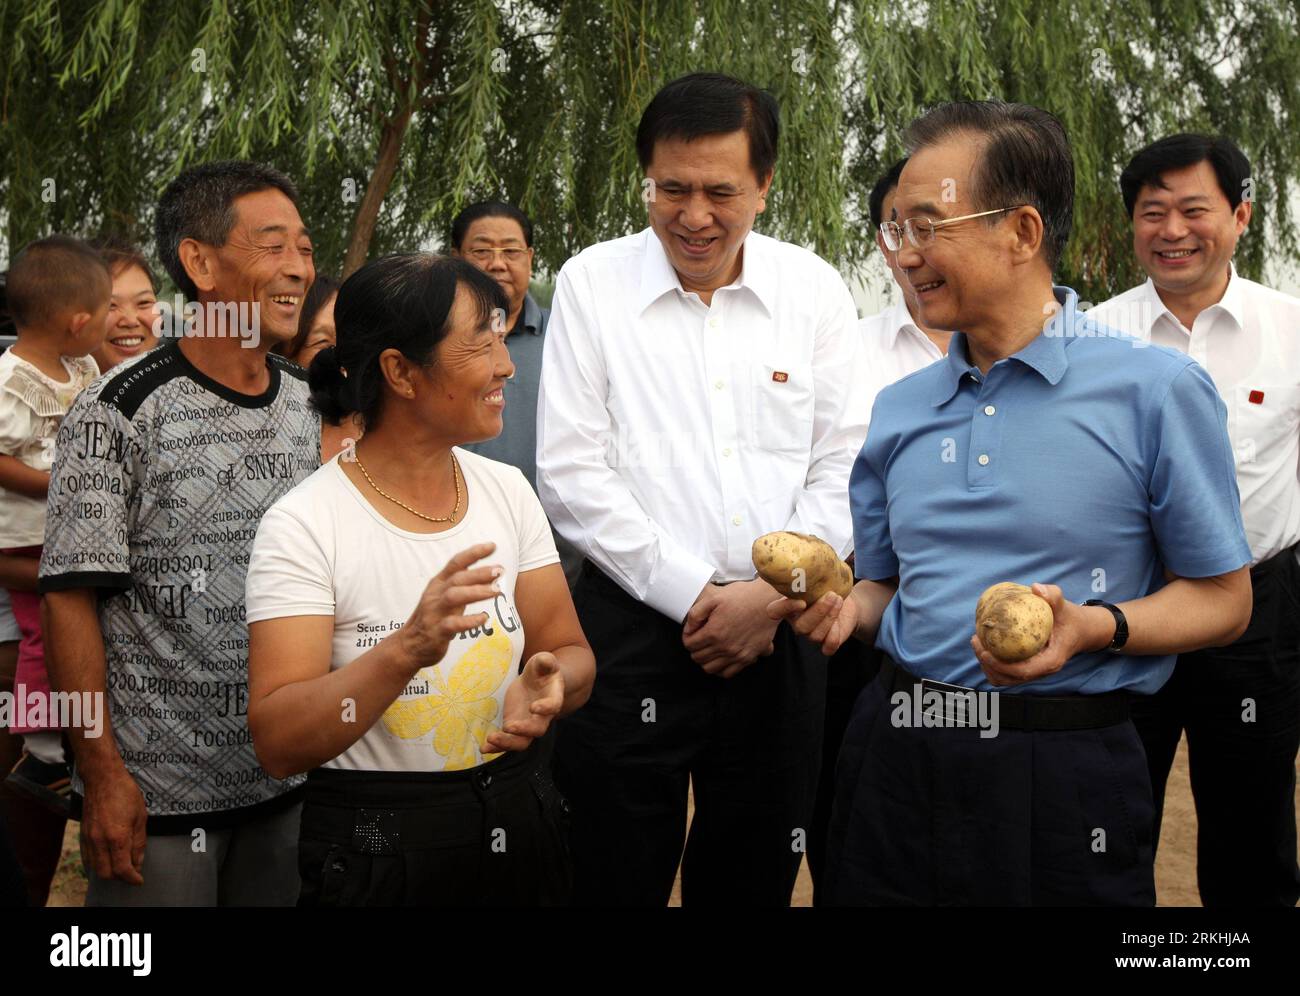 Bildnummer: 55836225  Datum: 26.08.2011  Copyright: imago/Xinhua (110828) -- SHIJIAZHUANG, Aug. 28, 2011 (Xinhua) -- Chinese Premier Wen Jiabao (2nd R) talks with local farmers in Huojiafang Village of Zhangjiakou City, north China s Hebei Province, Aug. 26, 2011. Wen paid an inspection tour to Zhangjiakou City of north China s Hebei Province from Firday to Sunday. During his tour, Wen visited farmers, milk companies, inspected agricultural bases and held a meeting on agricultural production and rural work. (Xinhua/Yao Dawei) (zgp) CHINA-HEBEI-ZHANGJIAKOU-WEN JIABAO-INSPECTION (CN) PUBLICATION Stock Photo